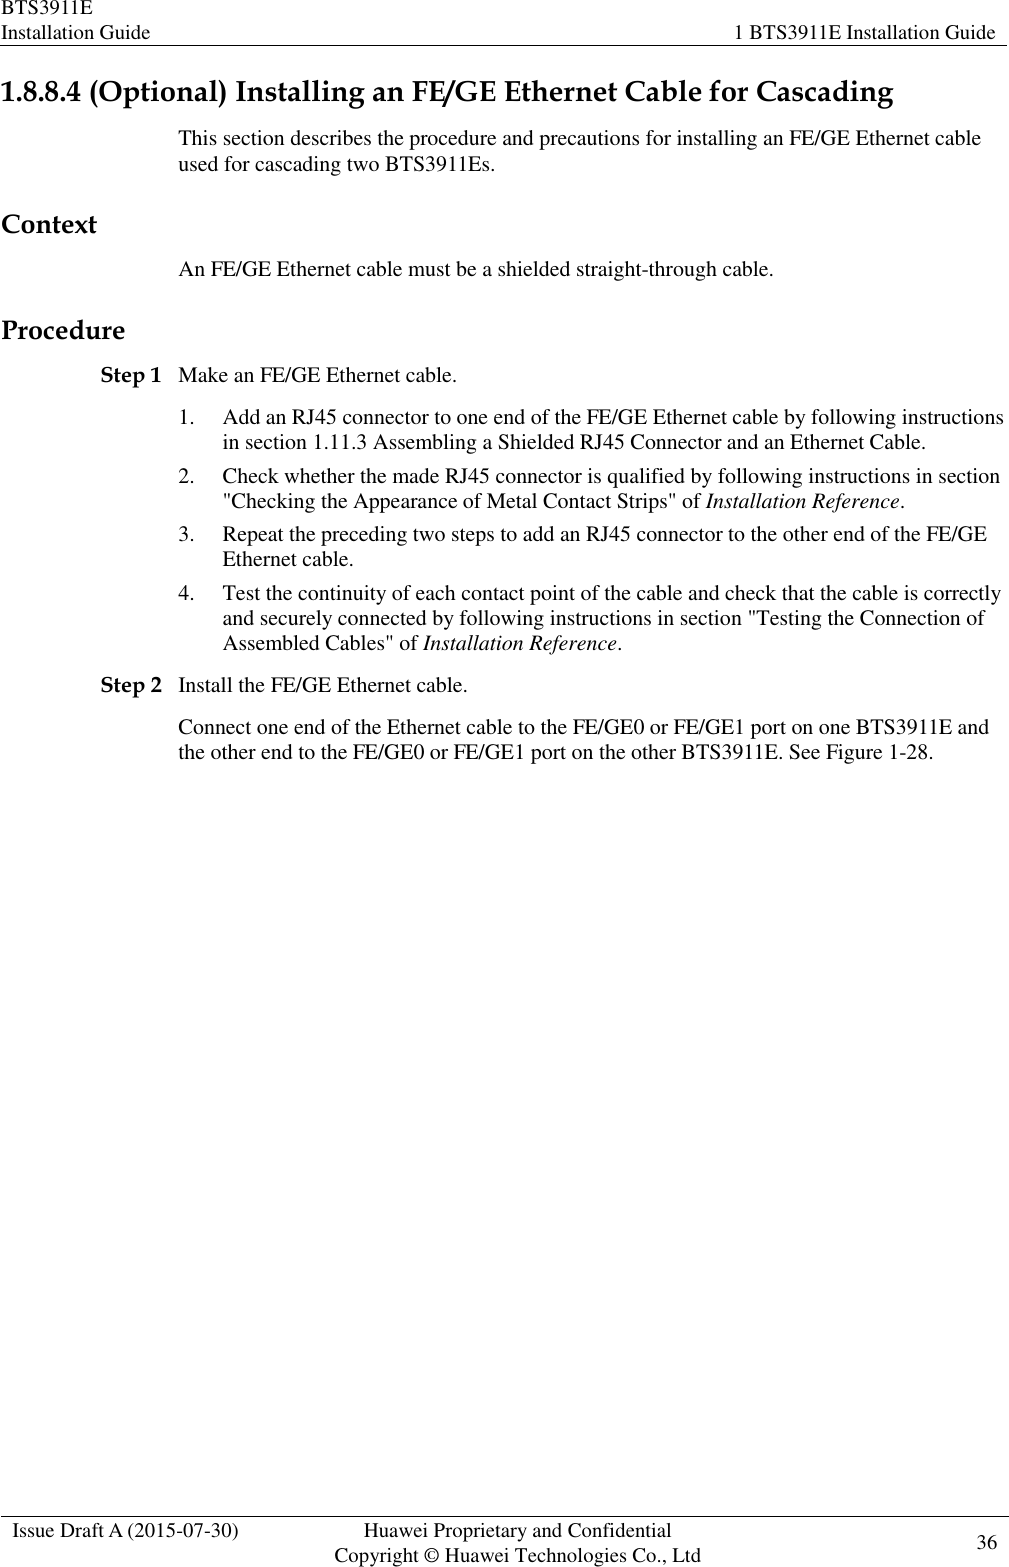 BTS3911E Installation Guide 1 BTS3911E Installation Guide  Issue Draft A (2015-07-30) Huawei Proprietary and Confidential           Copyright © Huawei Technologies Co., Ltd 36    1.8.8.4 (Optional) Installing an FE/GE Ethernet Cable for Cascading This section describes the procedure and precautions for installing an FE/GE Ethernet cable used for cascading two BTS3911Es. Context An FE/GE Ethernet cable must be a shielded straight-through cable. Procedure Step 1 Make an FE/GE Ethernet cable. 1. Add an RJ45 connector to one end of the FE/GE Ethernet cable by following instructions in section 1.11.3 Assembling a Shielded RJ45 Connector and an Ethernet Cable. 2. Check whether the made RJ45 connector is qualified by following instructions in section &quot;Checking the Appearance of Metal Contact Strips&quot; of Installation Reference. 3. Repeat the preceding two steps to add an RJ45 connector to the other end of the FE/GE Ethernet cable. 4. Test the continuity of each contact point of the cable and check that the cable is correctly and securely connected by following instructions in section &quot;Testing the Connection of Assembled Cables&quot; of Installation Reference. Step 2 Install the FE/GE Ethernet cable. Connect one end of the Ethernet cable to the FE/GE0 or FE/GE1 port on one BTS3911E and the other end to the FE/GE0 or FE/GE1 port on the other BTS3911E. See Figure 1-28. 